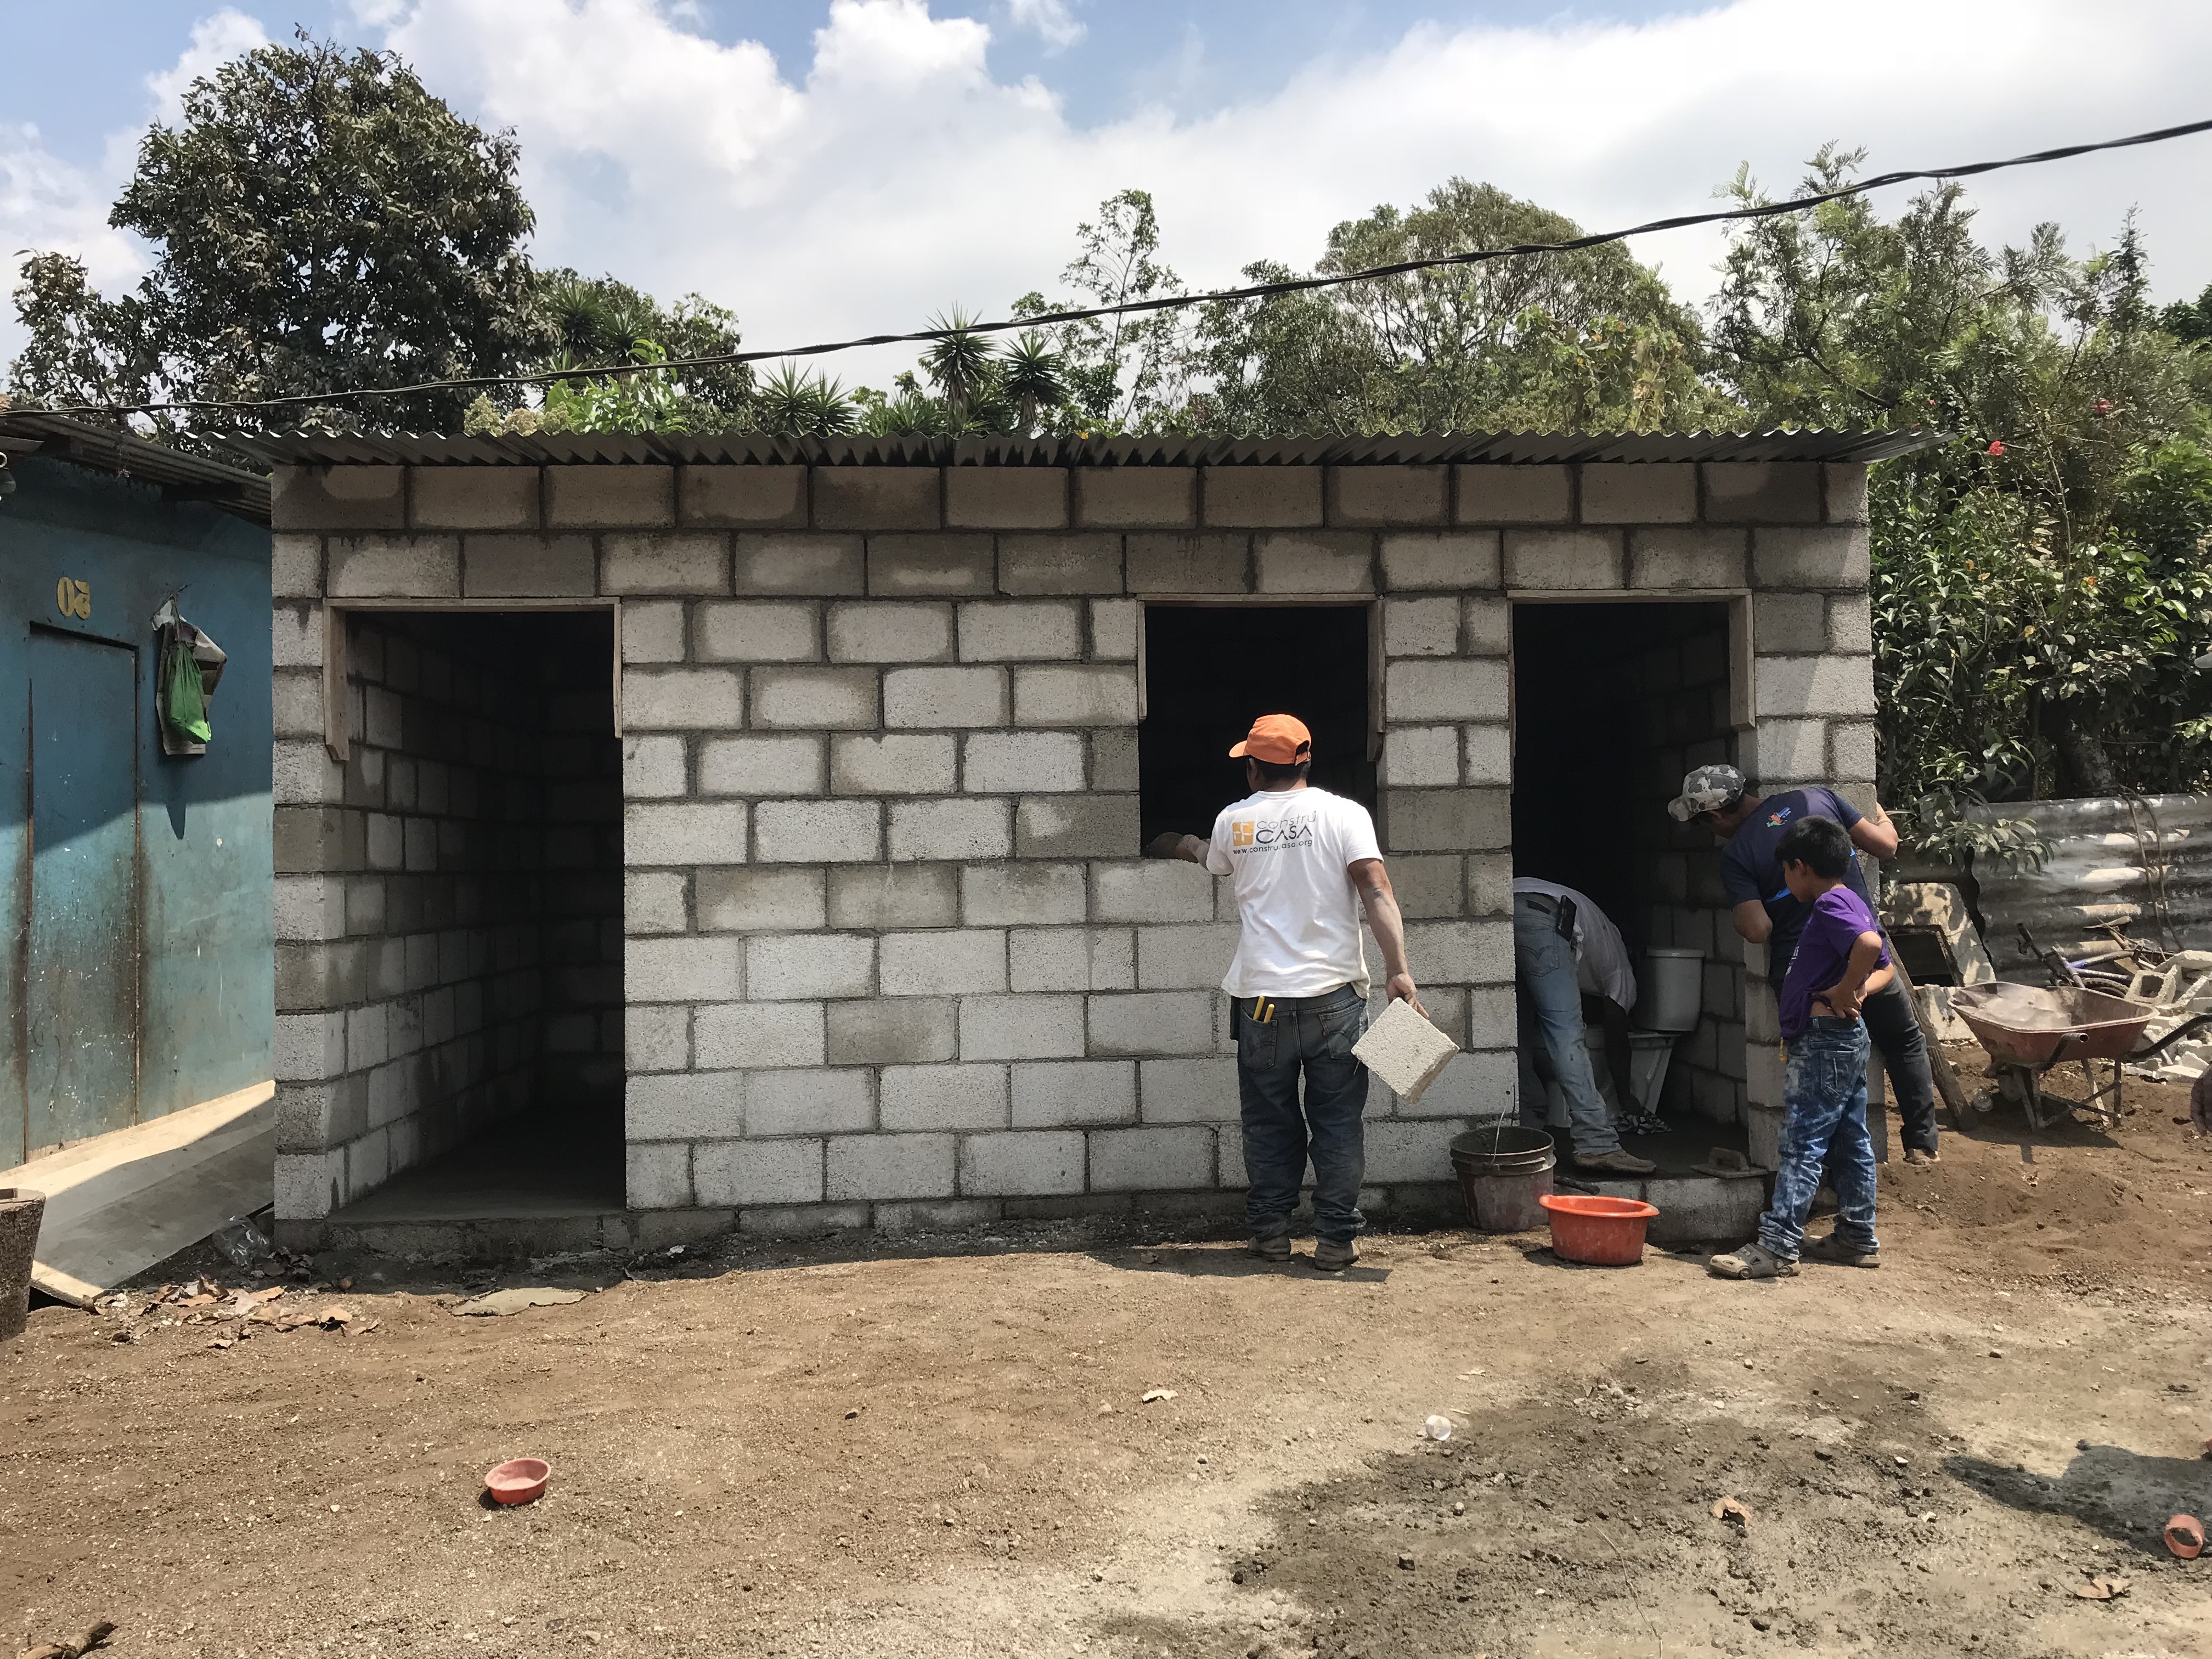 Why are homes in Mexico often made from concrete but not in the US? - Quora